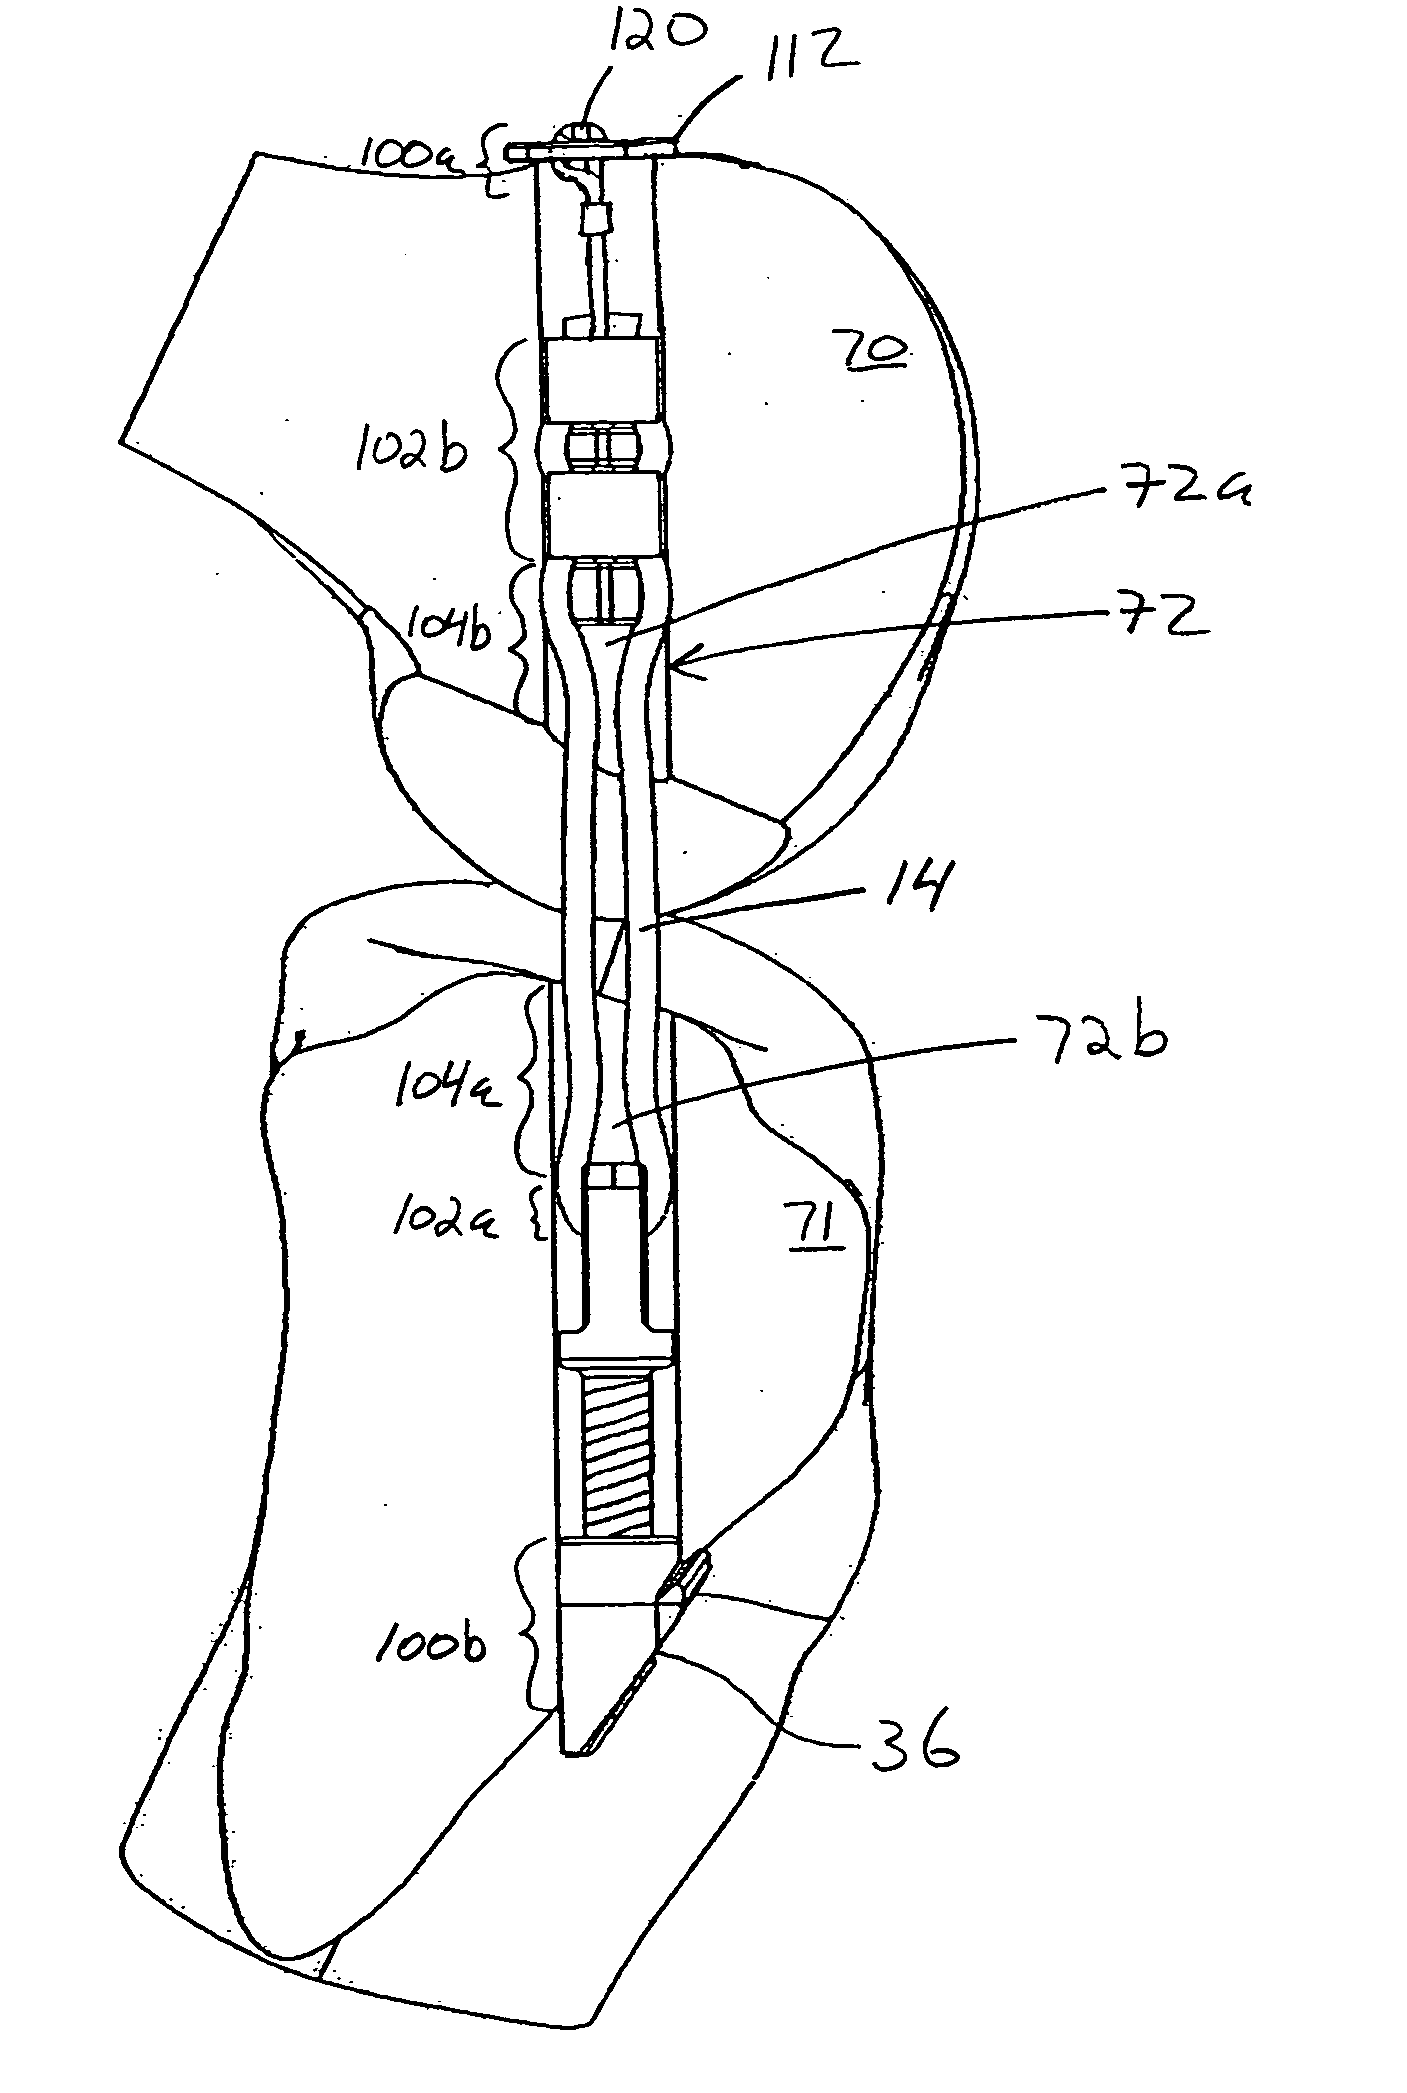 Apparatus for assembling anterior cruciate ligament reconstruction system